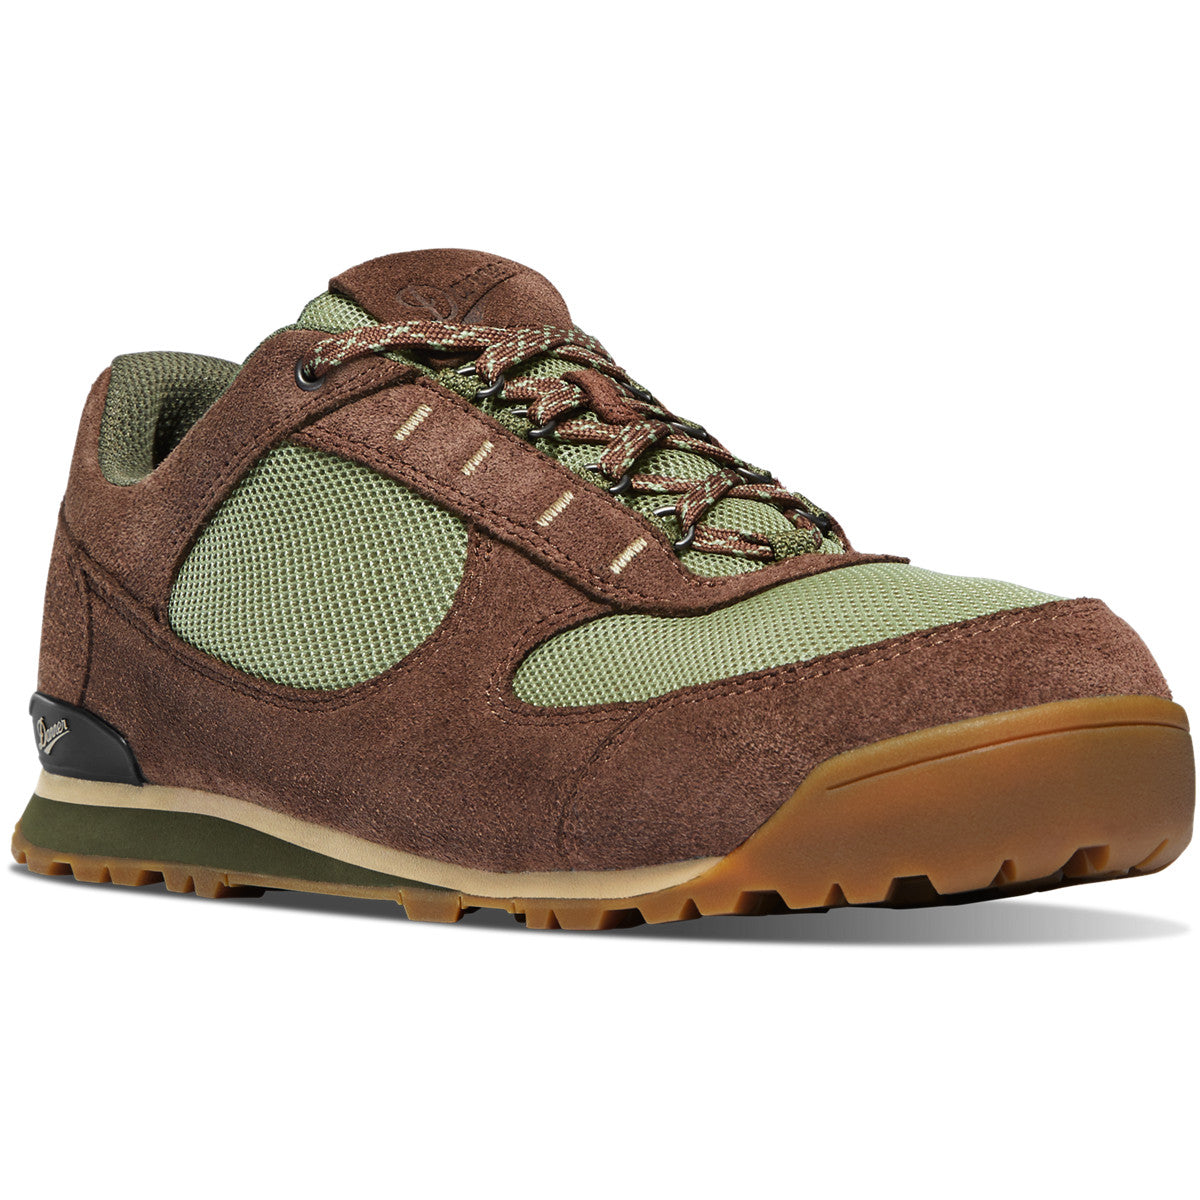 Men's Danner Jag Low 3" Hiking Shoe in Pinecone/Moss from the side view